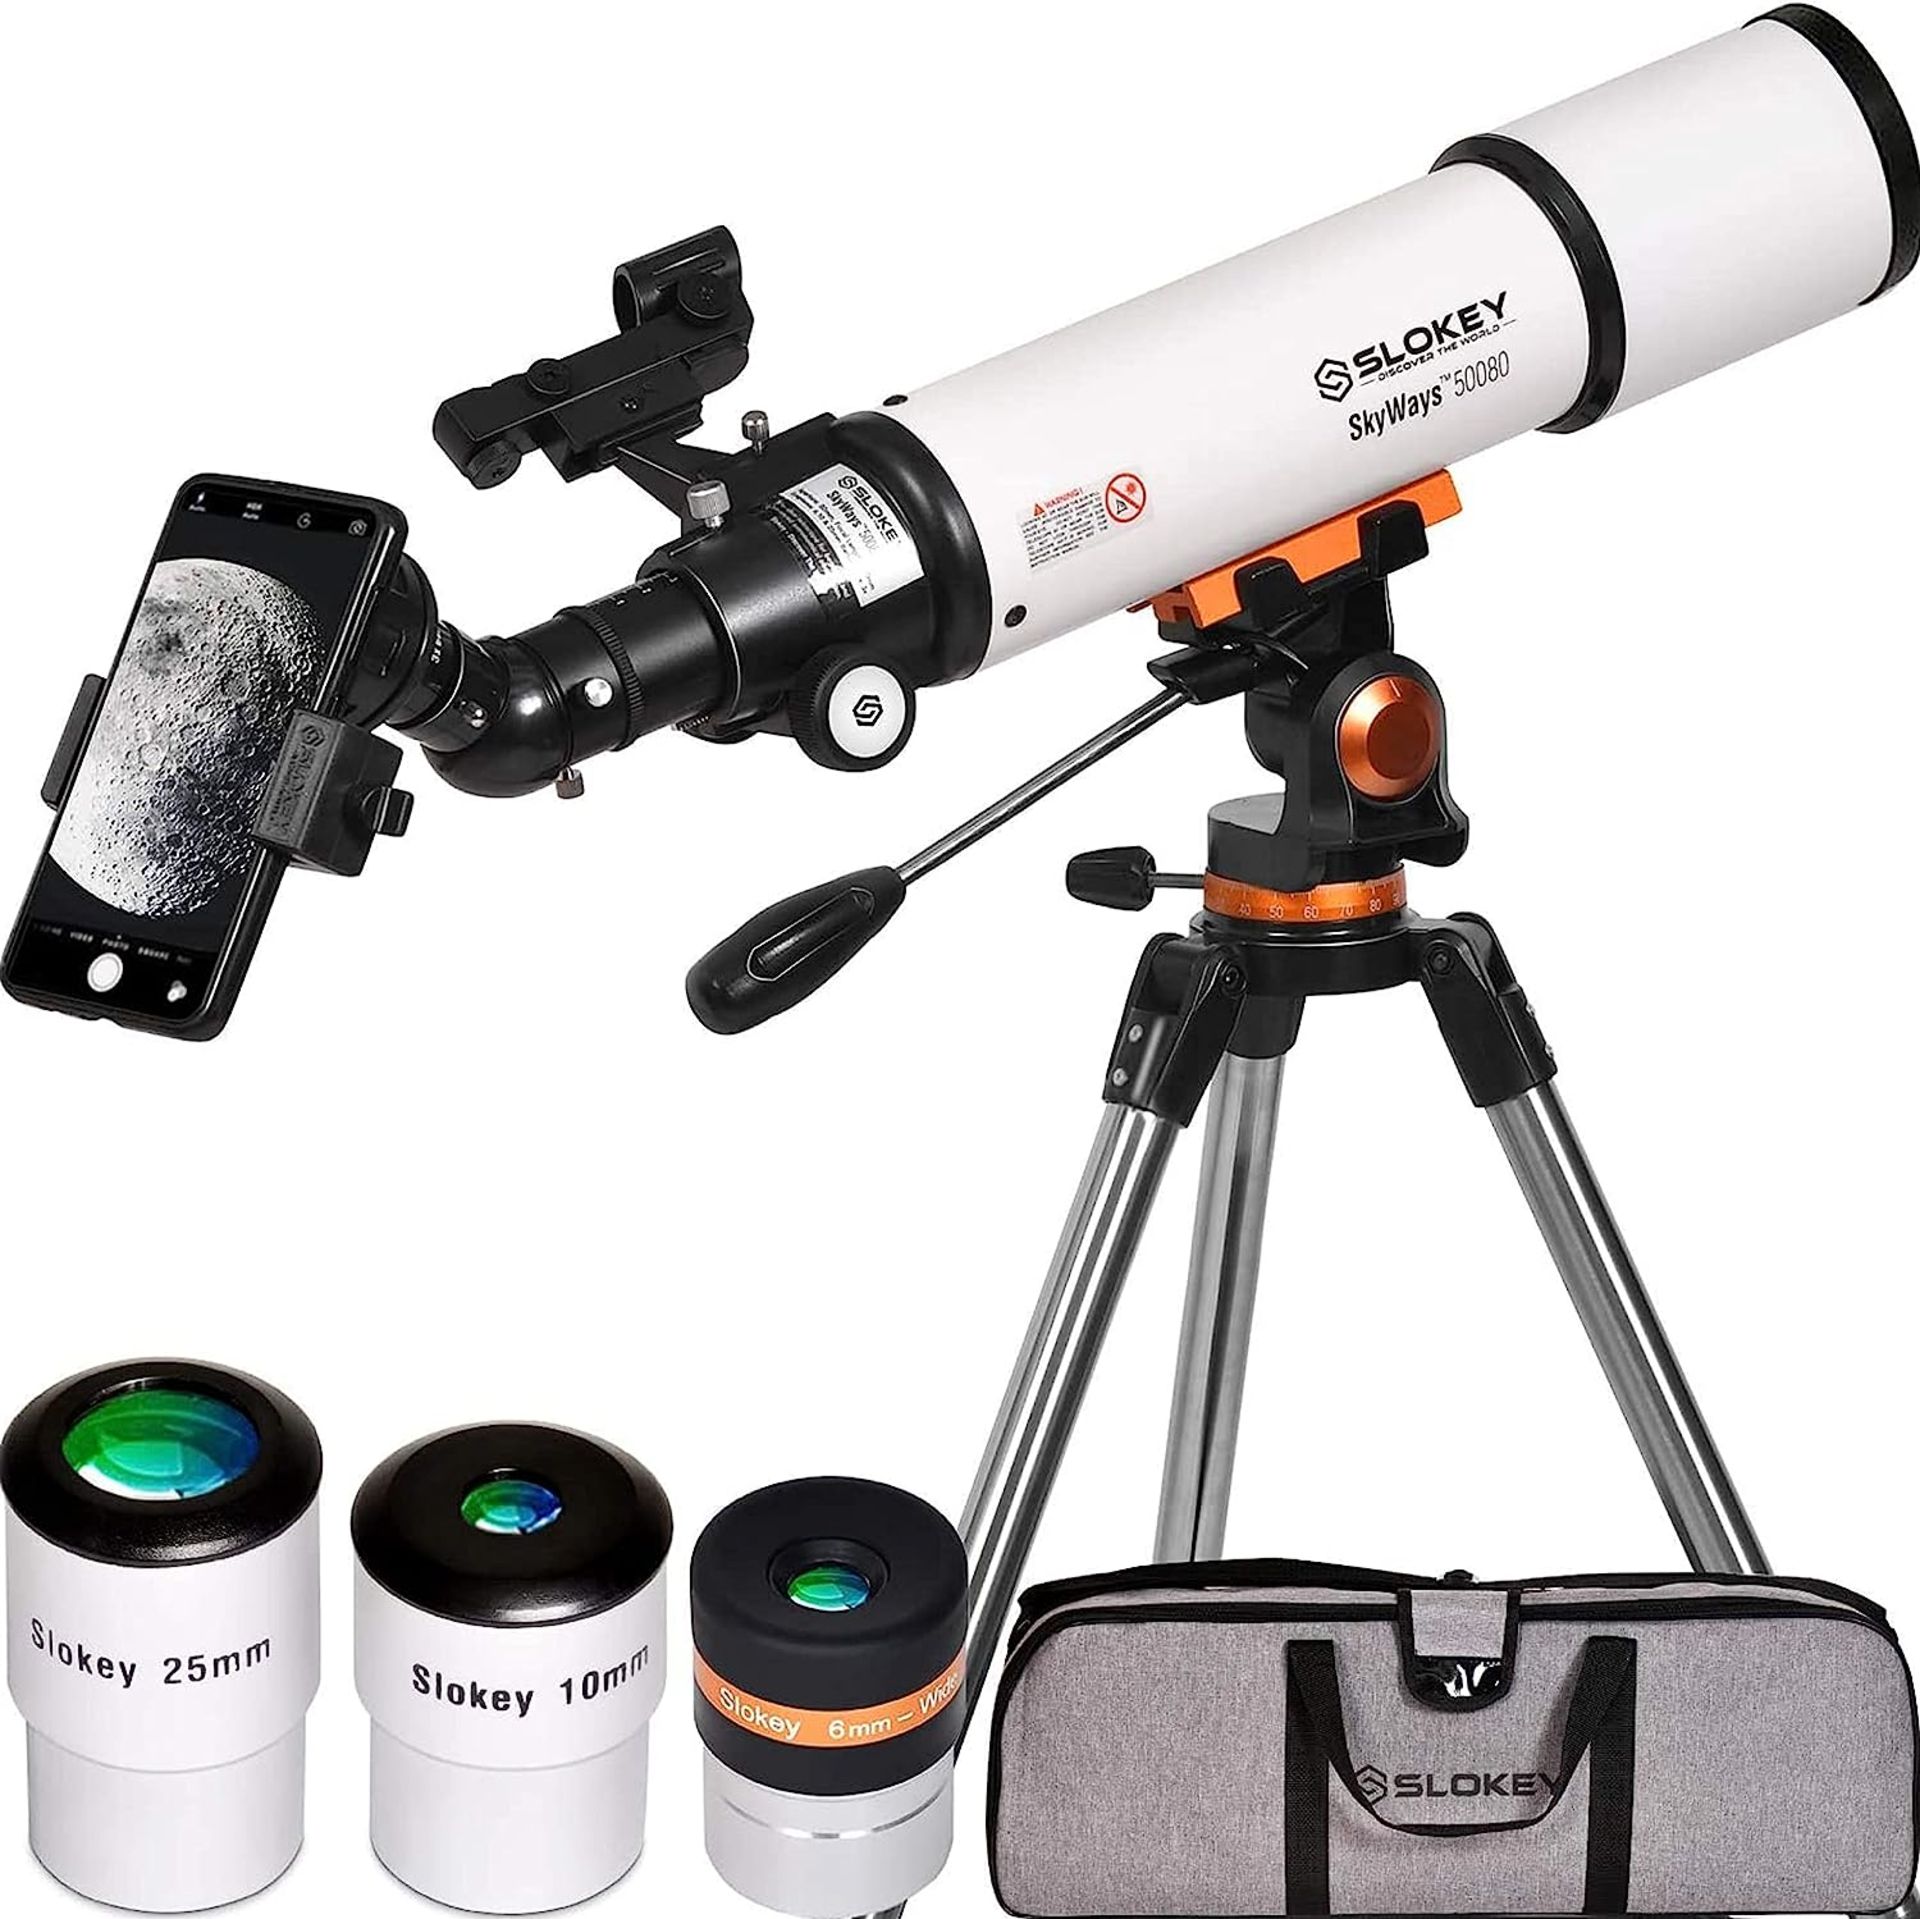 10 x Slokey 50080 Skyways Telescope for Astronomy with Accessories (NEW) - AMAZON RRP £2,77.49 ! - Image 2 of 7